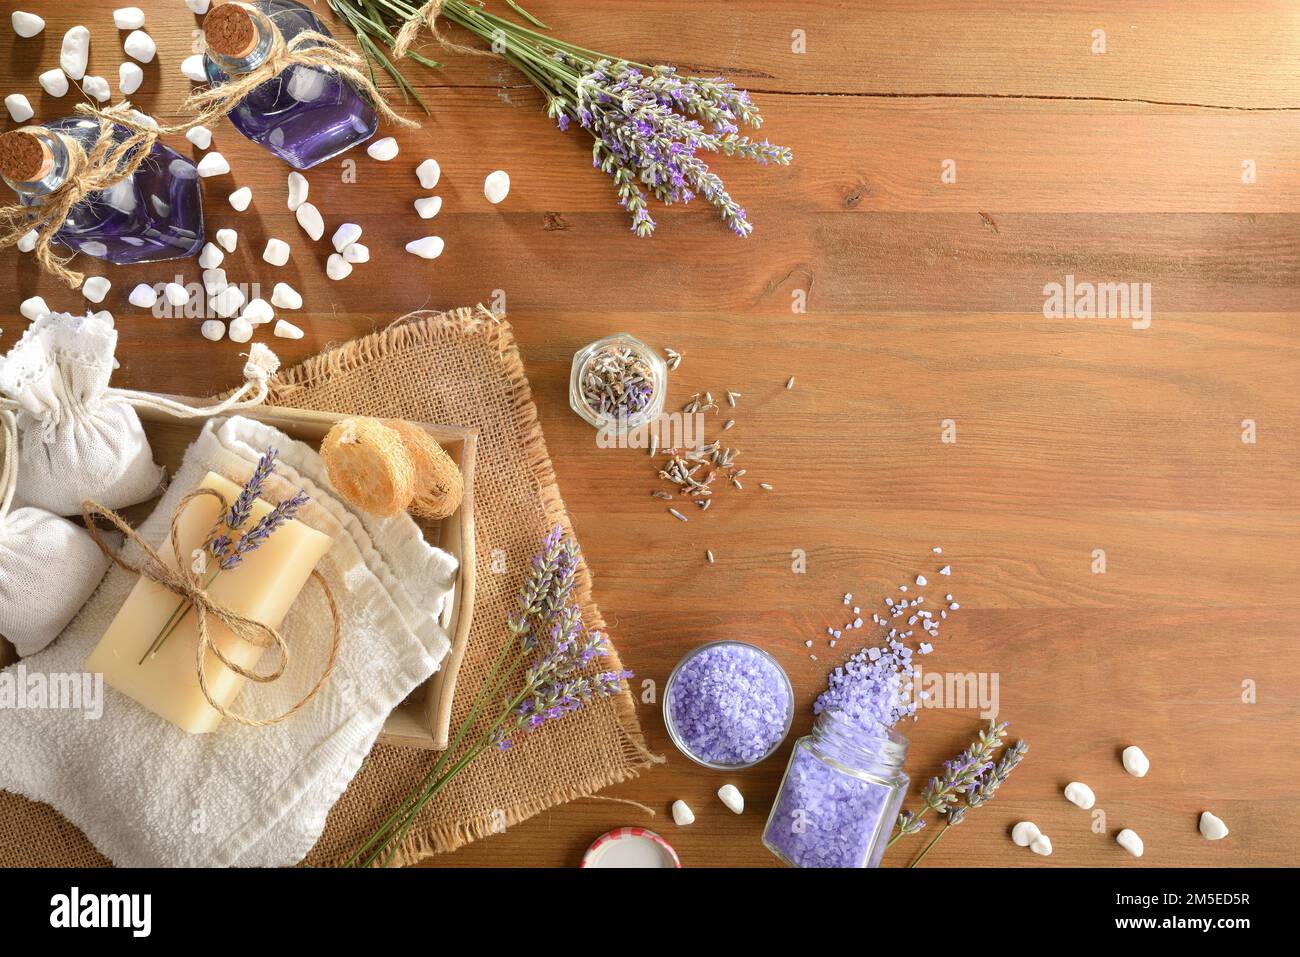 Set of natural lavender body hygiene products on wooden table. Top view. Horizontal composition. Stock Photo